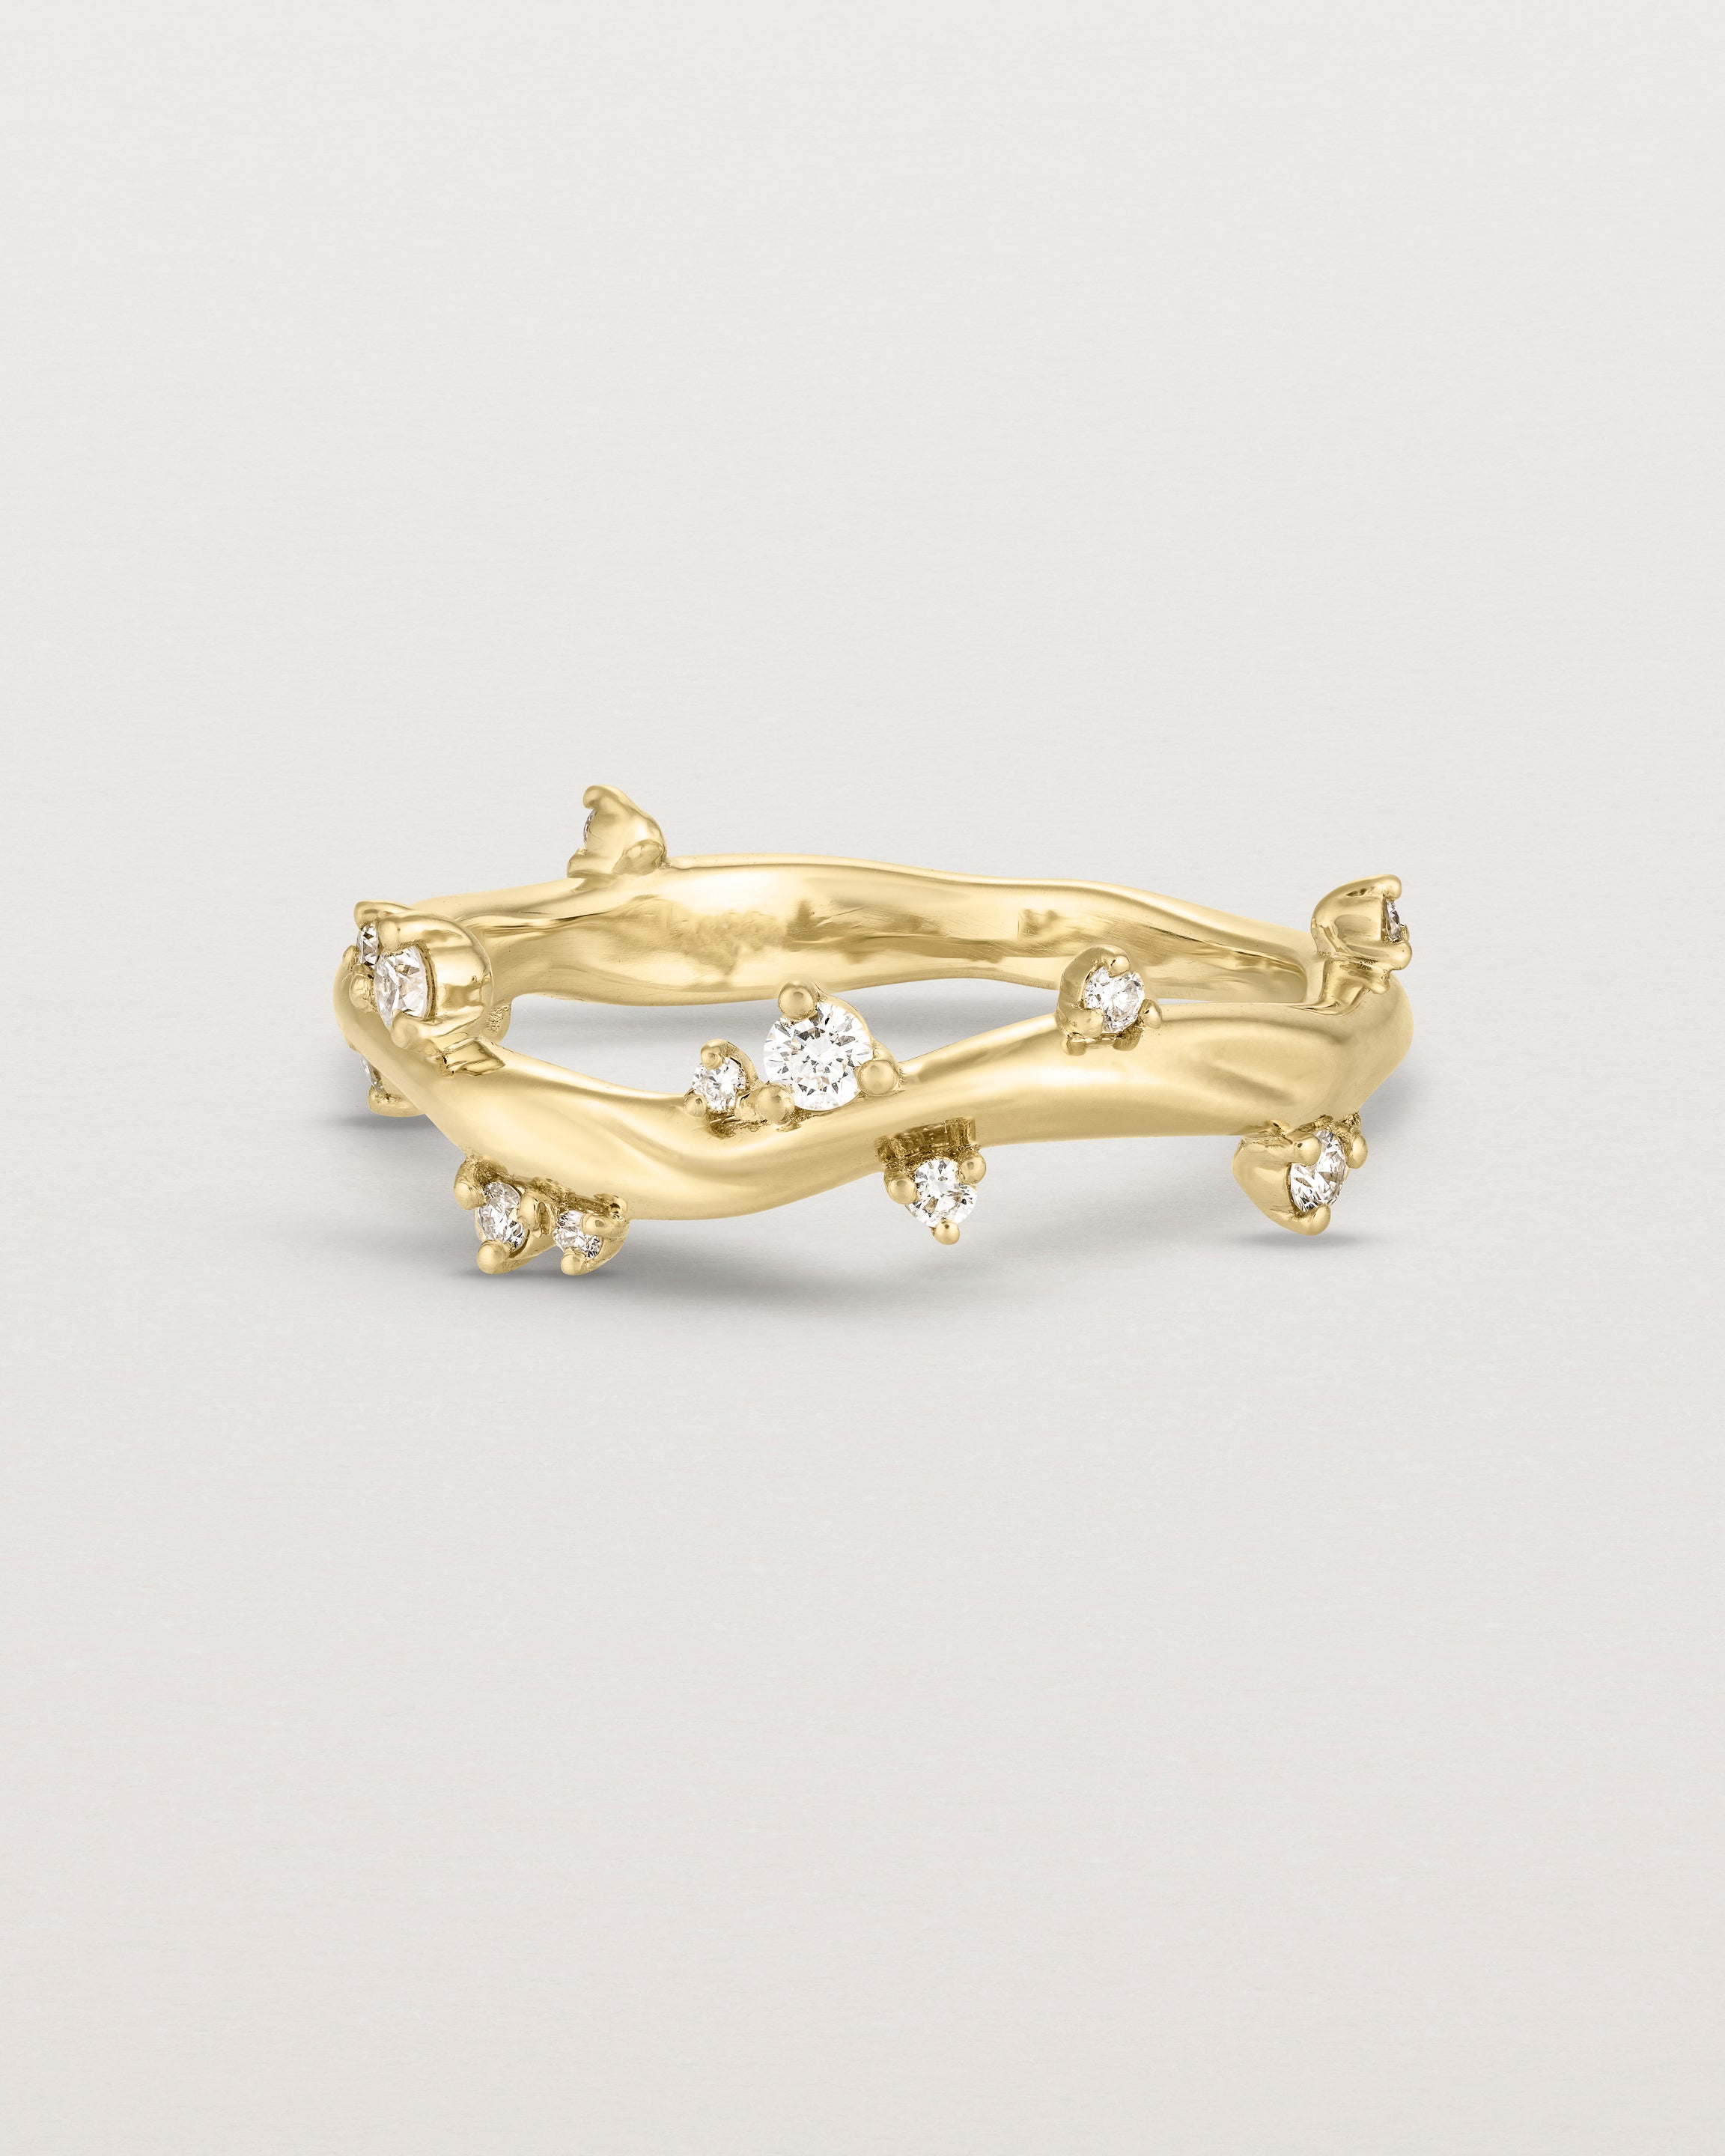 Product photo of the yellow gold Ember ring with white diamonds scattered around the band.